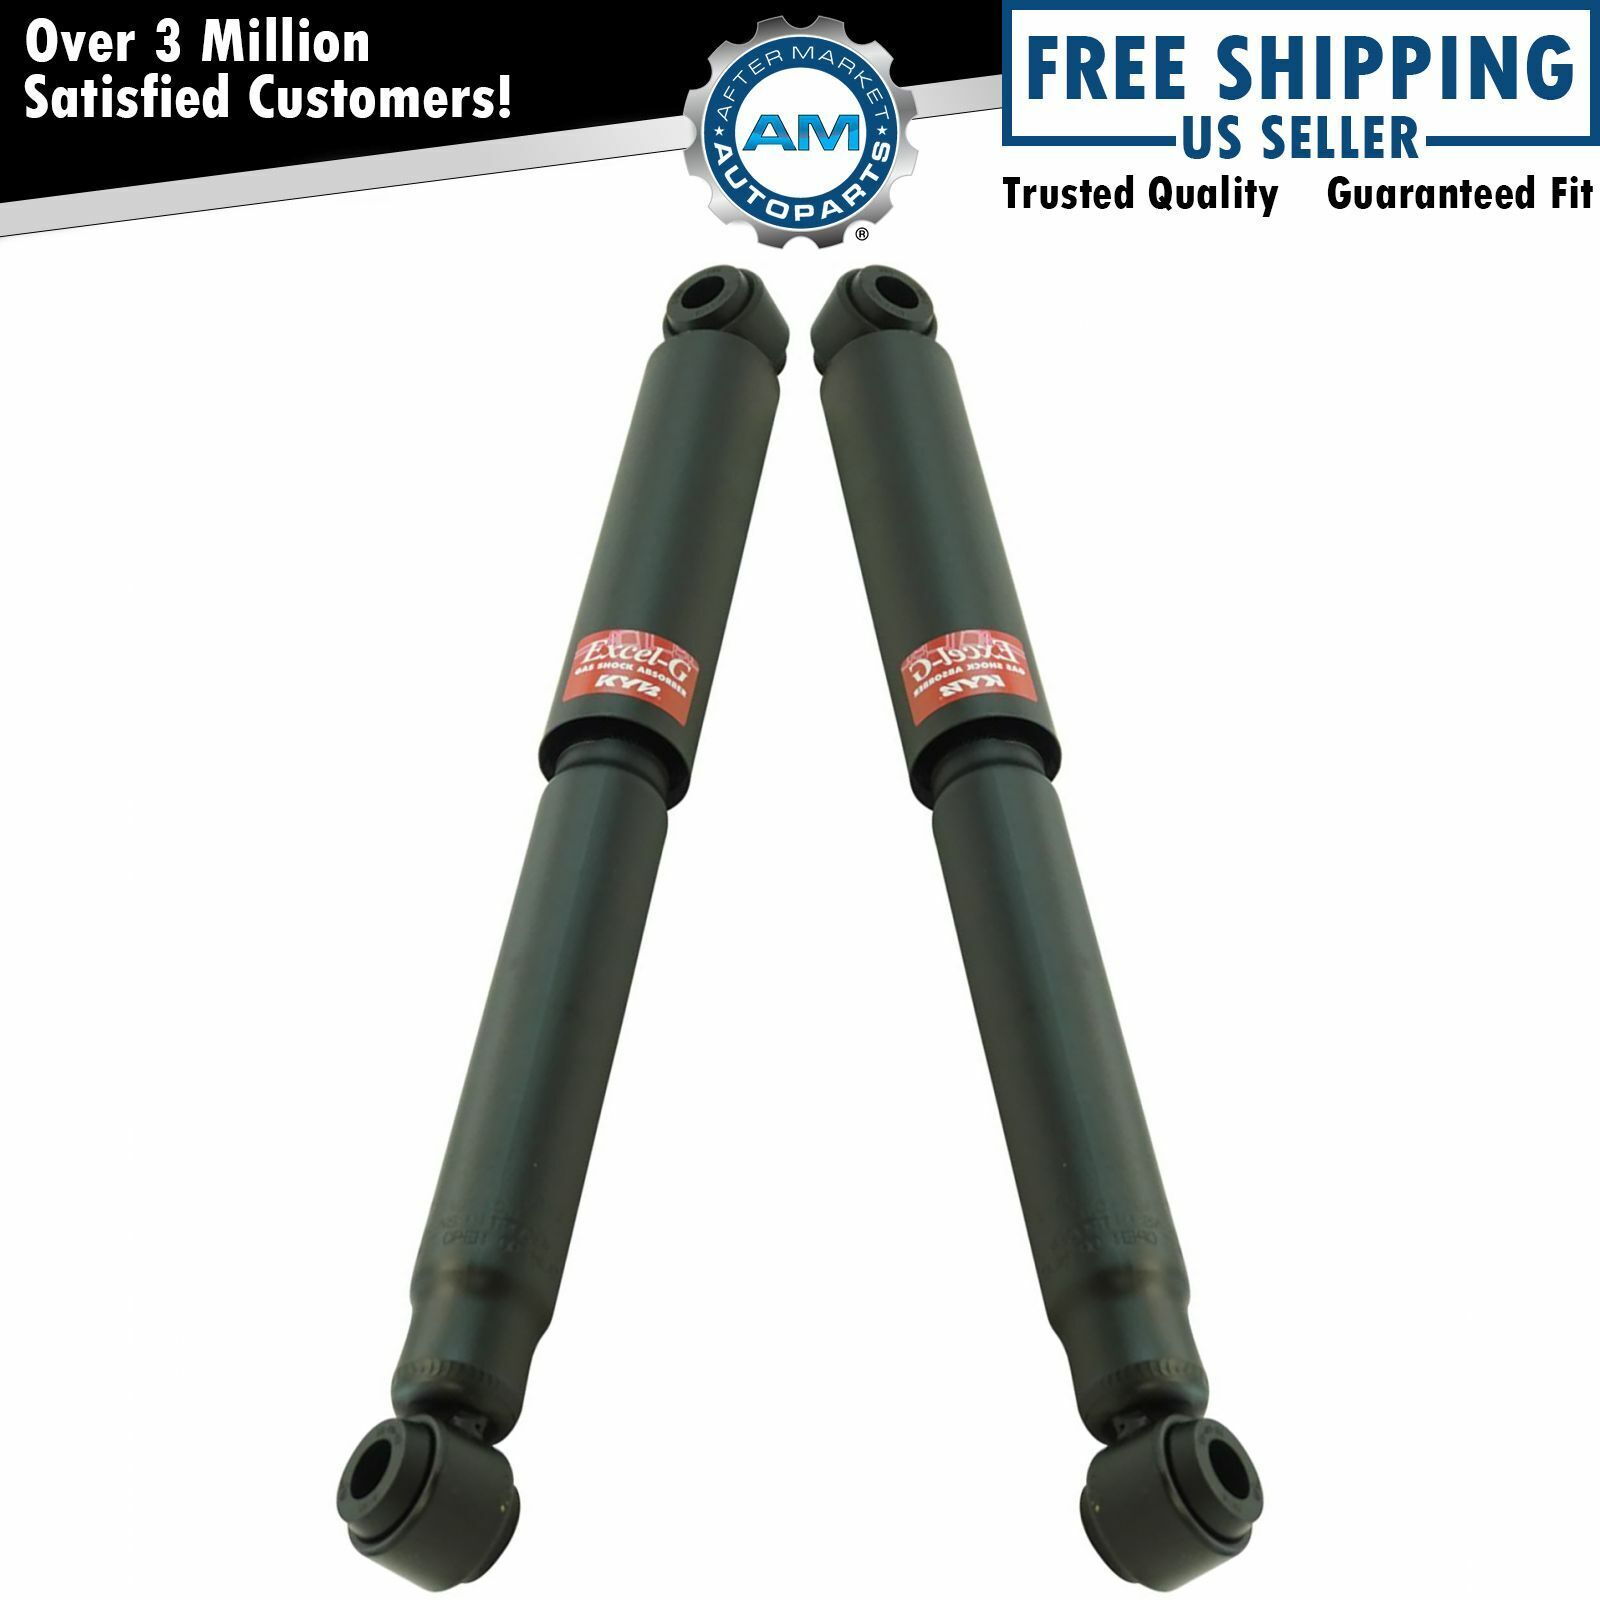 KYB Excel-G 344428 Rear Shock Absorber LH RH Pair for Toyota Pickup Truck SUV